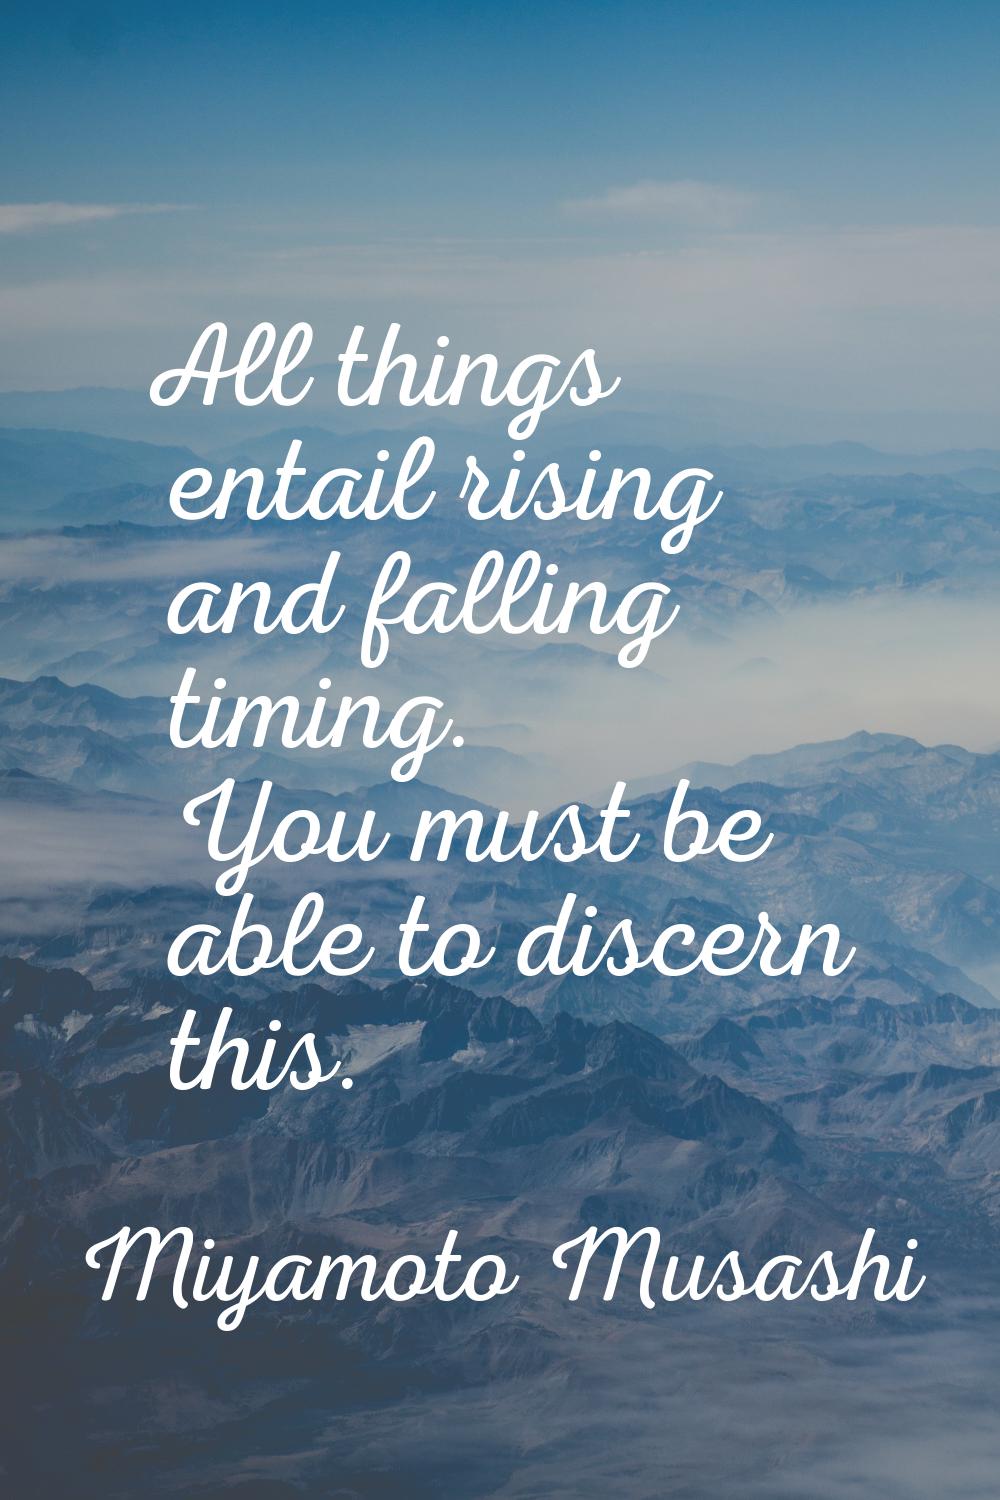 All things entail rising and falling timing. You must be able to discern this.